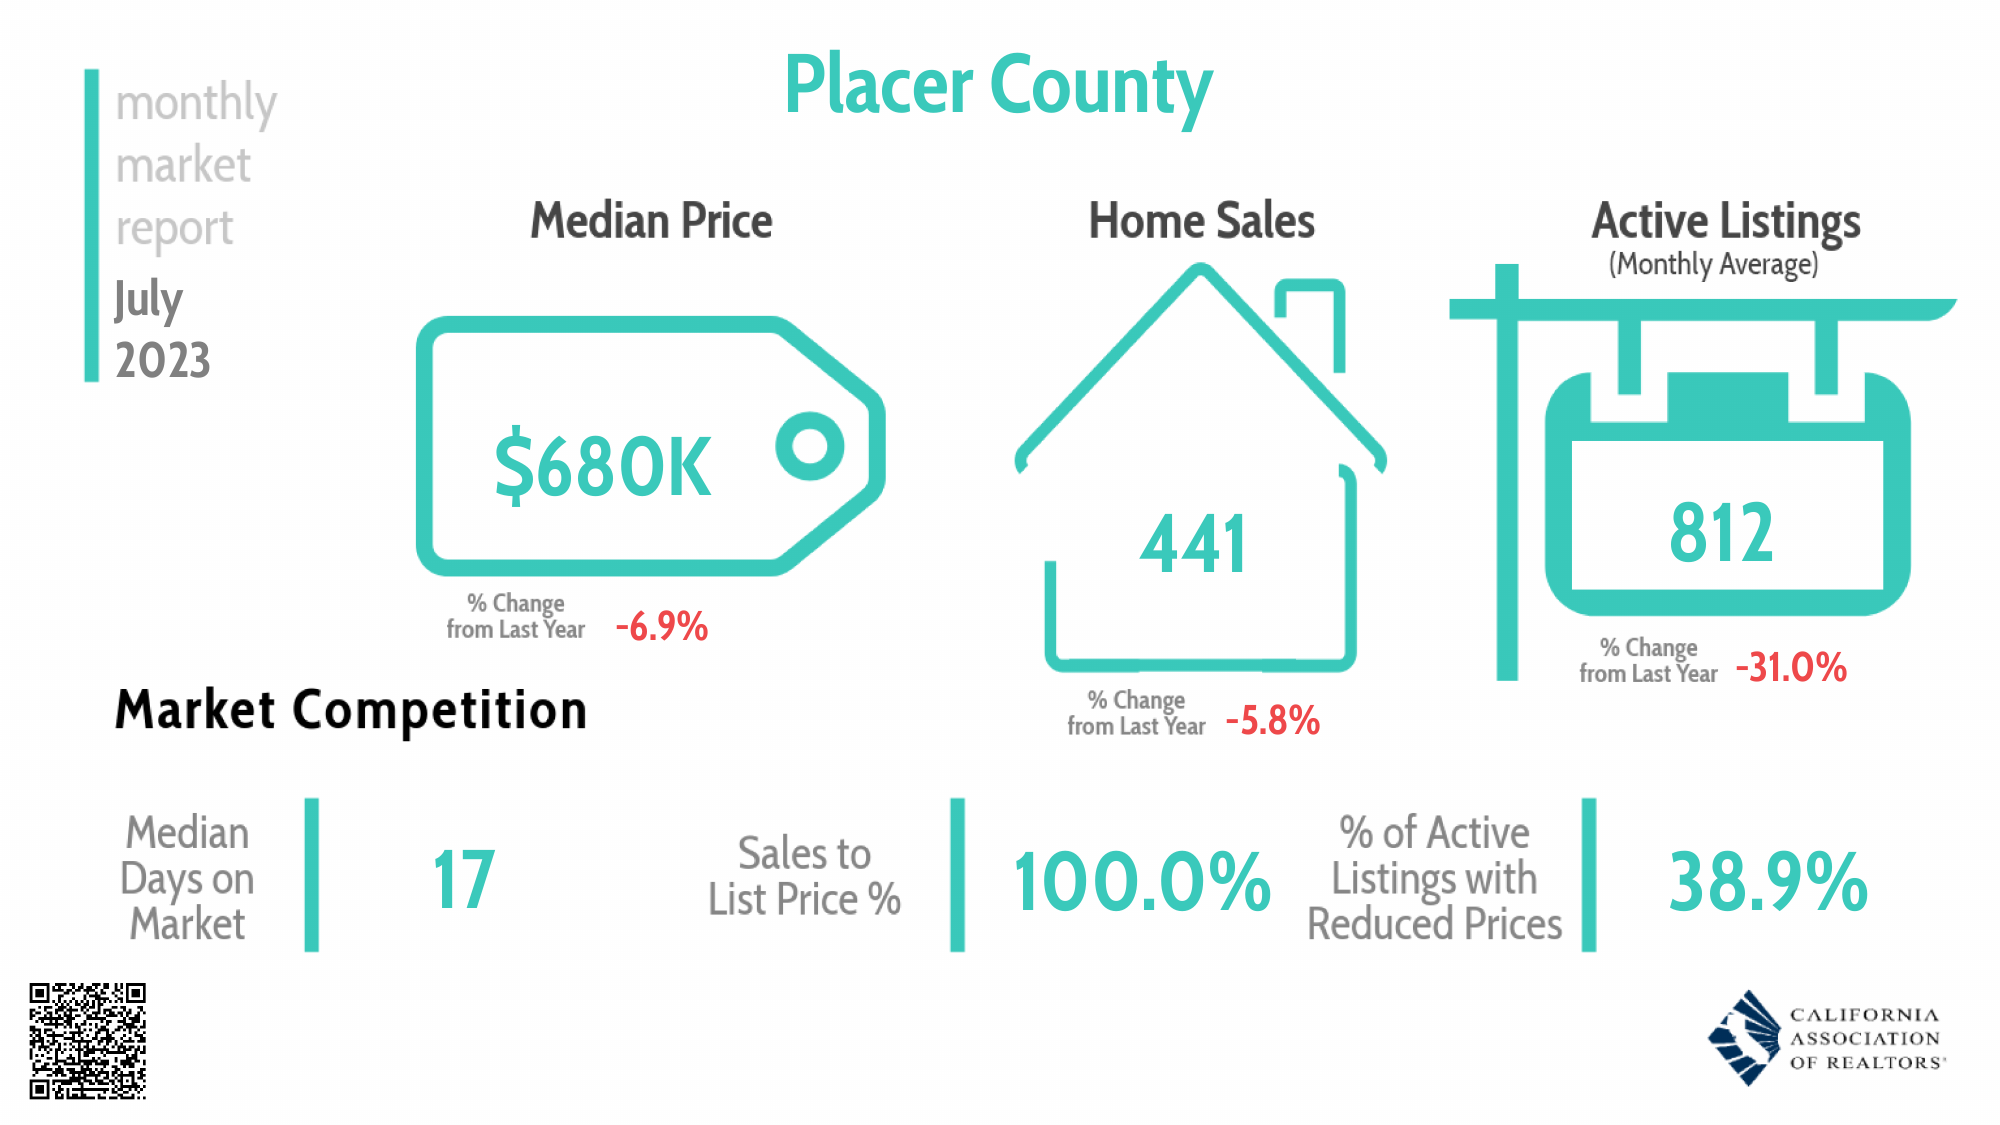 Placer County Homes